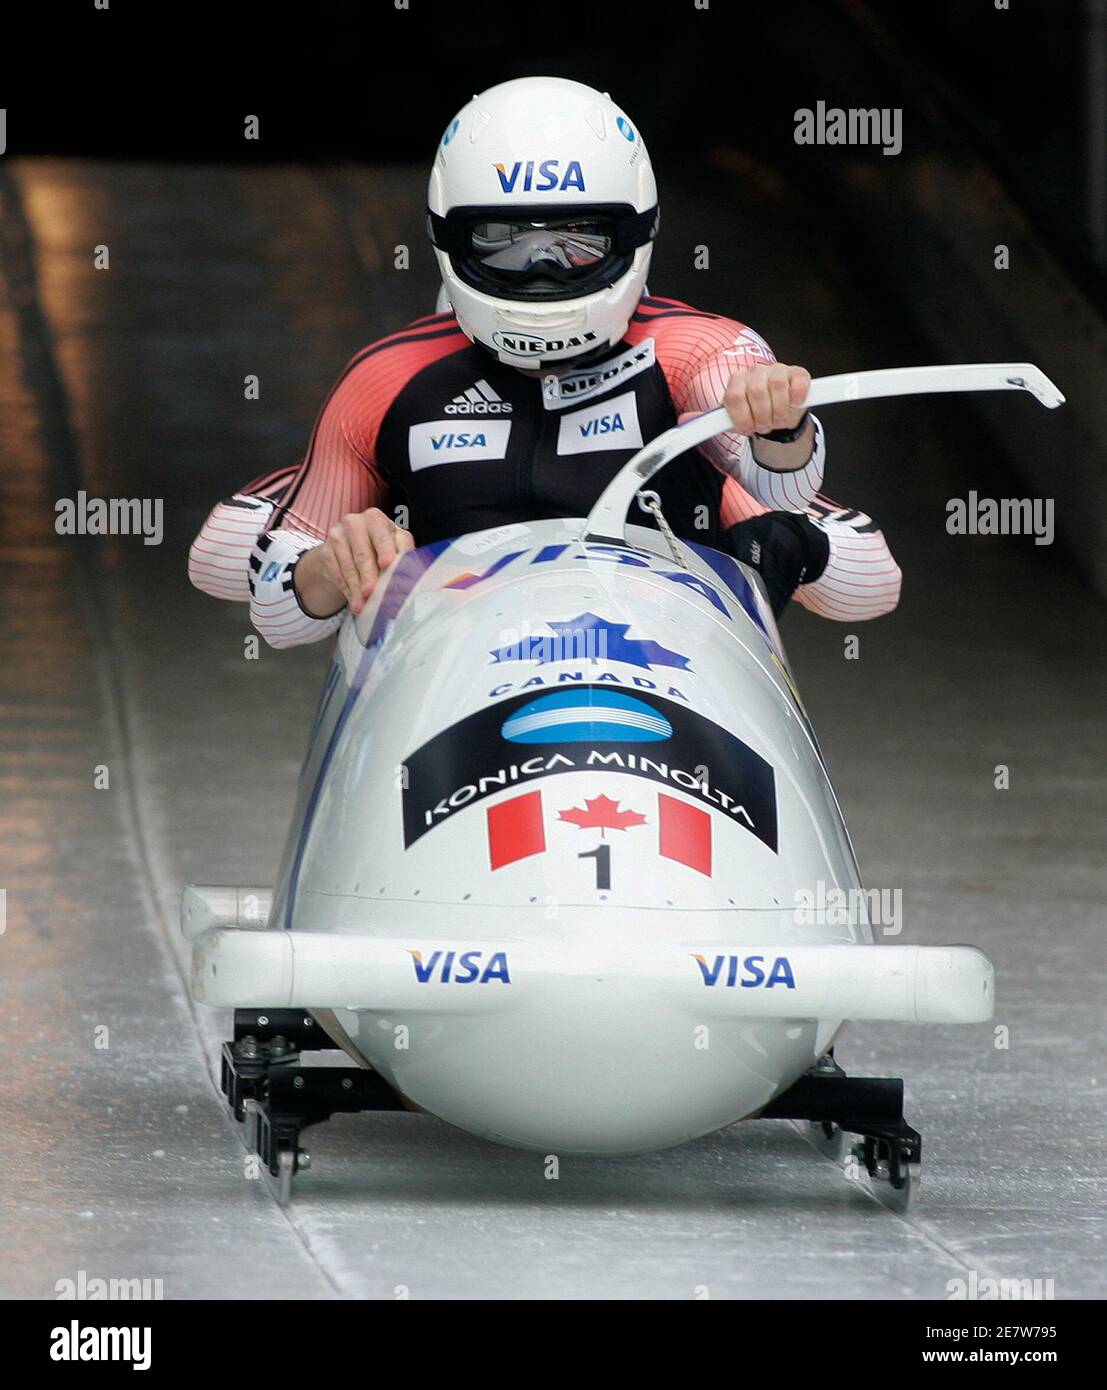 Team Canada 1 with Pierre Lueders (front) and David Bissett ride their bobsleigh during the first run of the bobsleigh World Cup final race in the southern Bavarian resort of Koenigssee, February 23, 2007. Team Germany 1 with Andre Lange and Kevin Kuske won the race ahead of Team Germany 2 with Matthias Hoepfner and Andreas Porth and Team Canada 1.   REUTERS/Alexandra Beier (GERMANY) Stock Photo